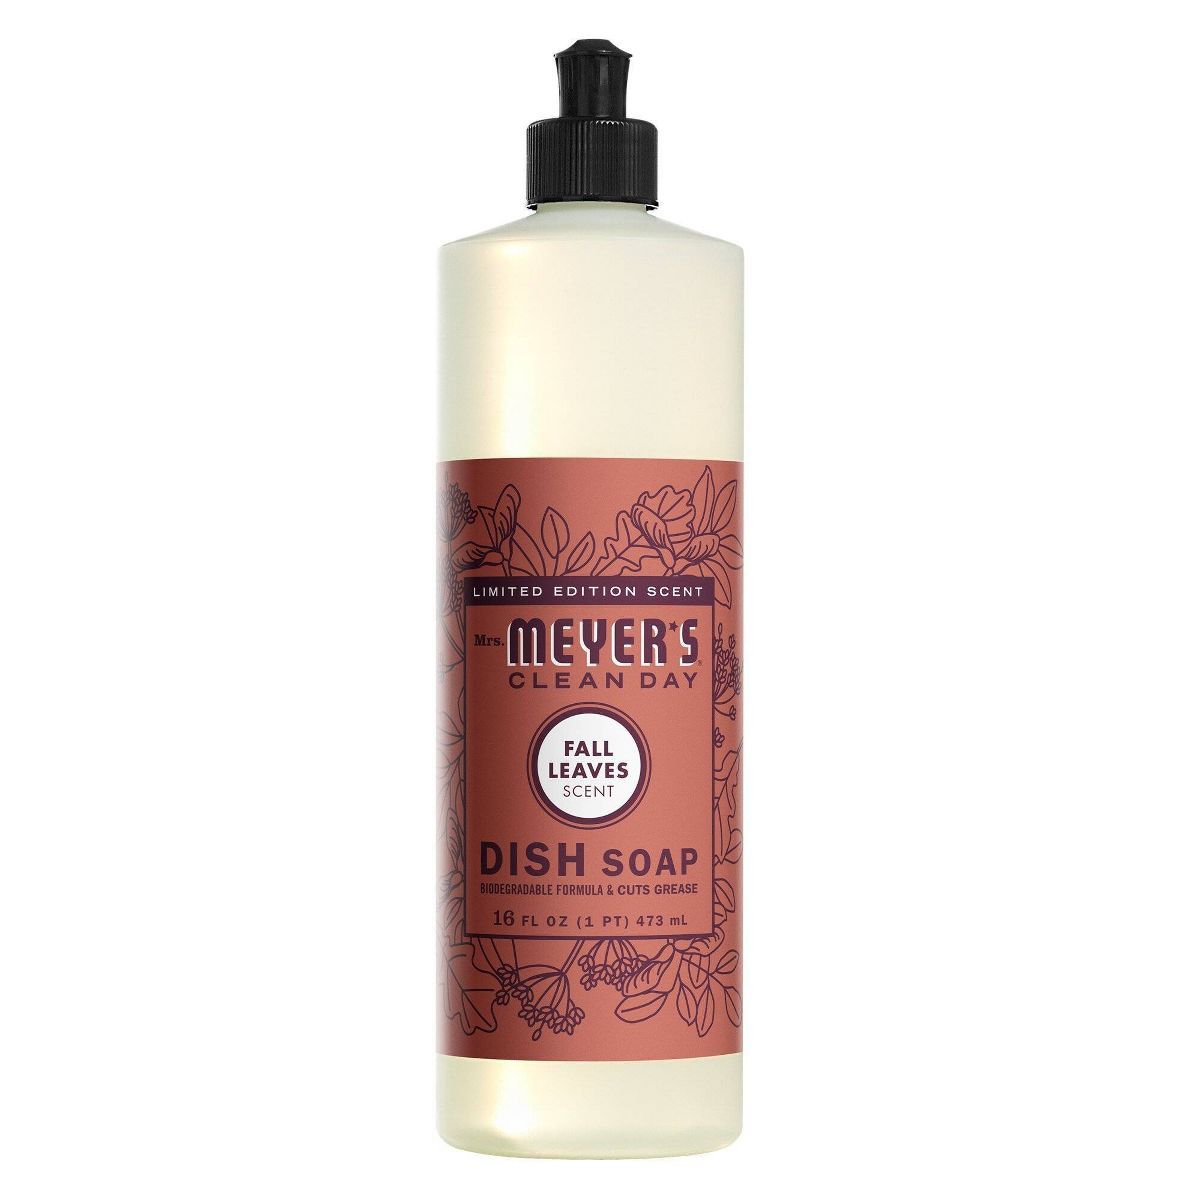 Mrs. Meyer's Clean Day Dish Soap - Fall Leaves - 16 fl oz | Target